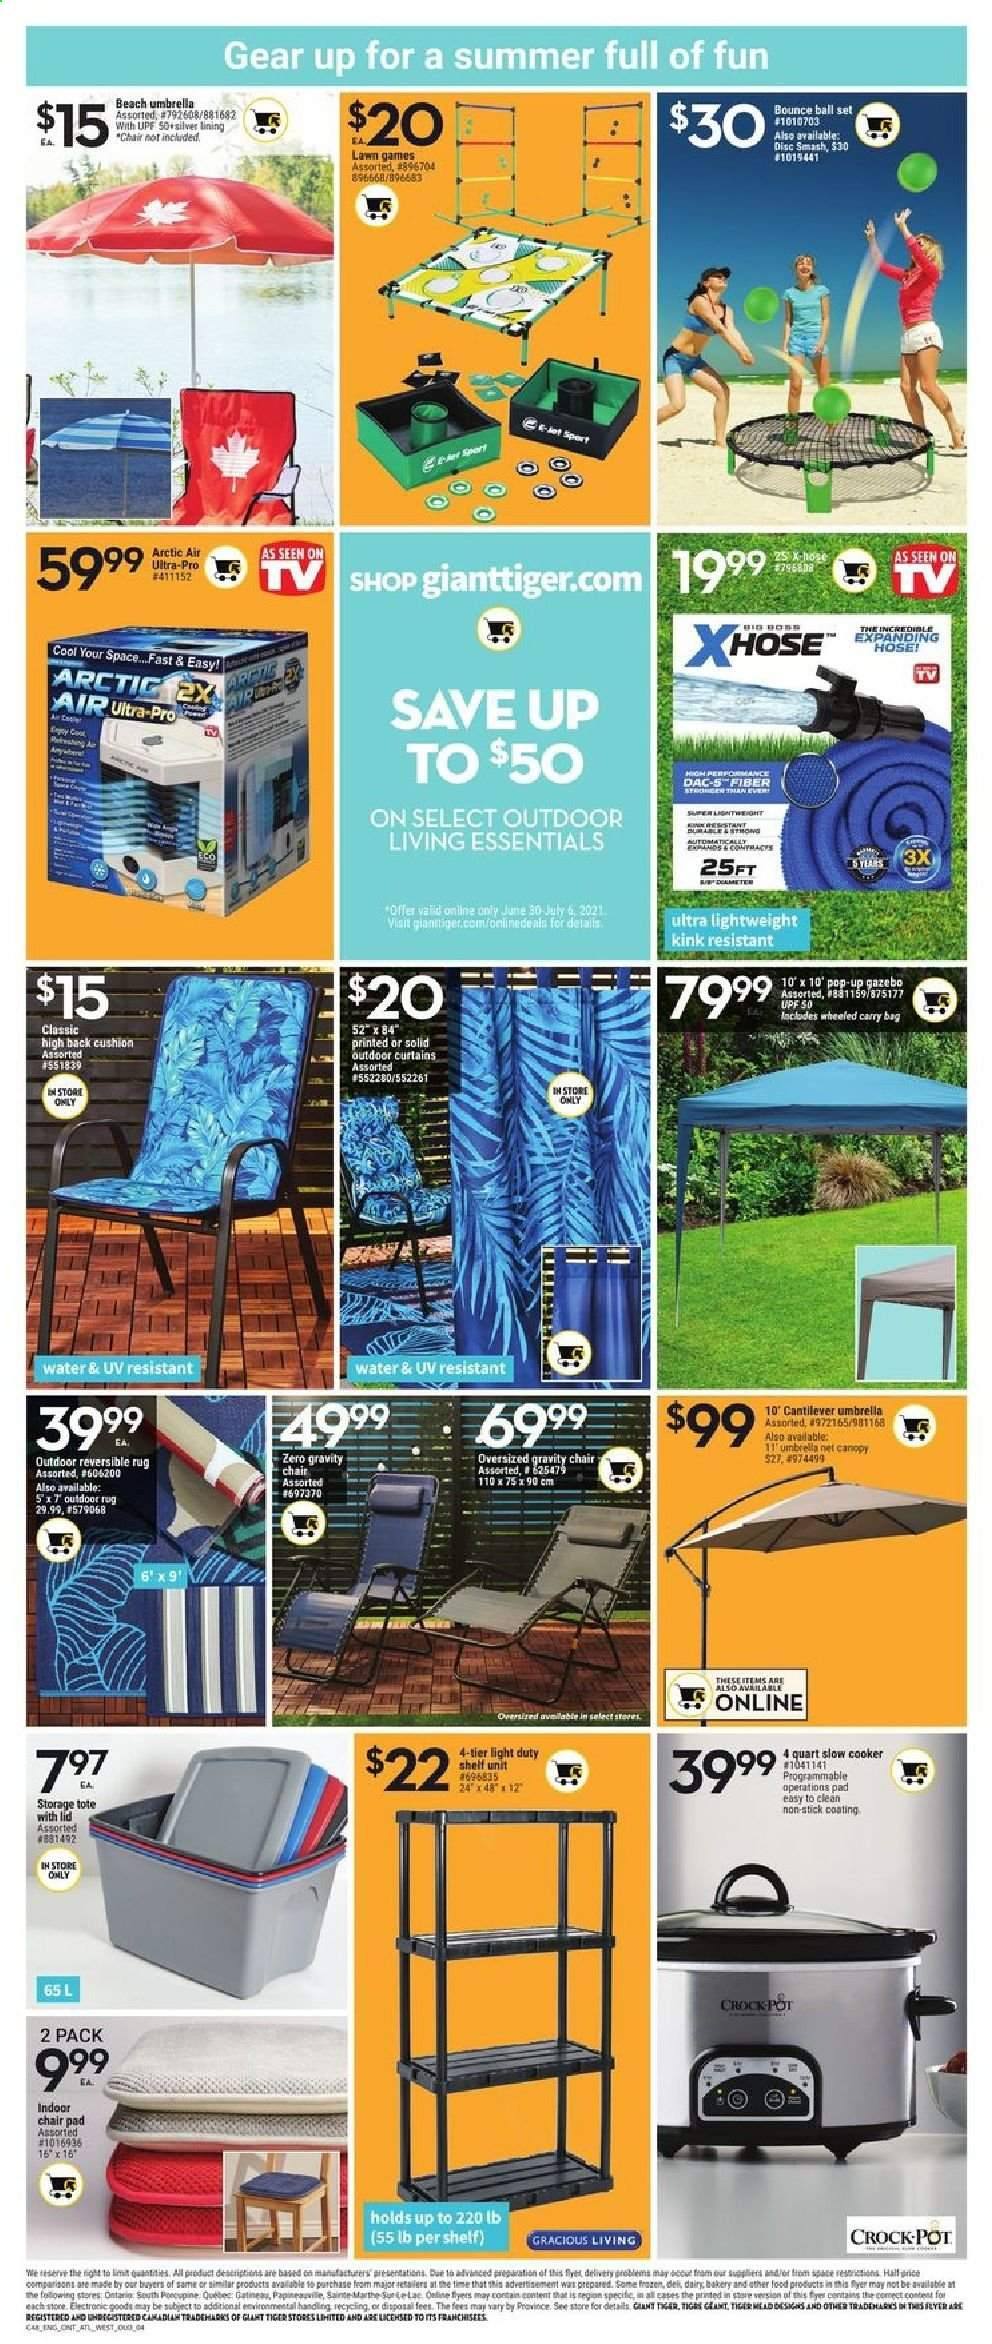 thumbnail - Giant Tiger Flyer - June 30, 2021 - July 06, 2021 - Sales products - DAC, pot, chair pad, cushion, curtain, TV, slow cooker, CrockPot, chair, shelf unit, carry bag, umbrella, rug, storage tote, gazebo, beach umbrella. Page 9.